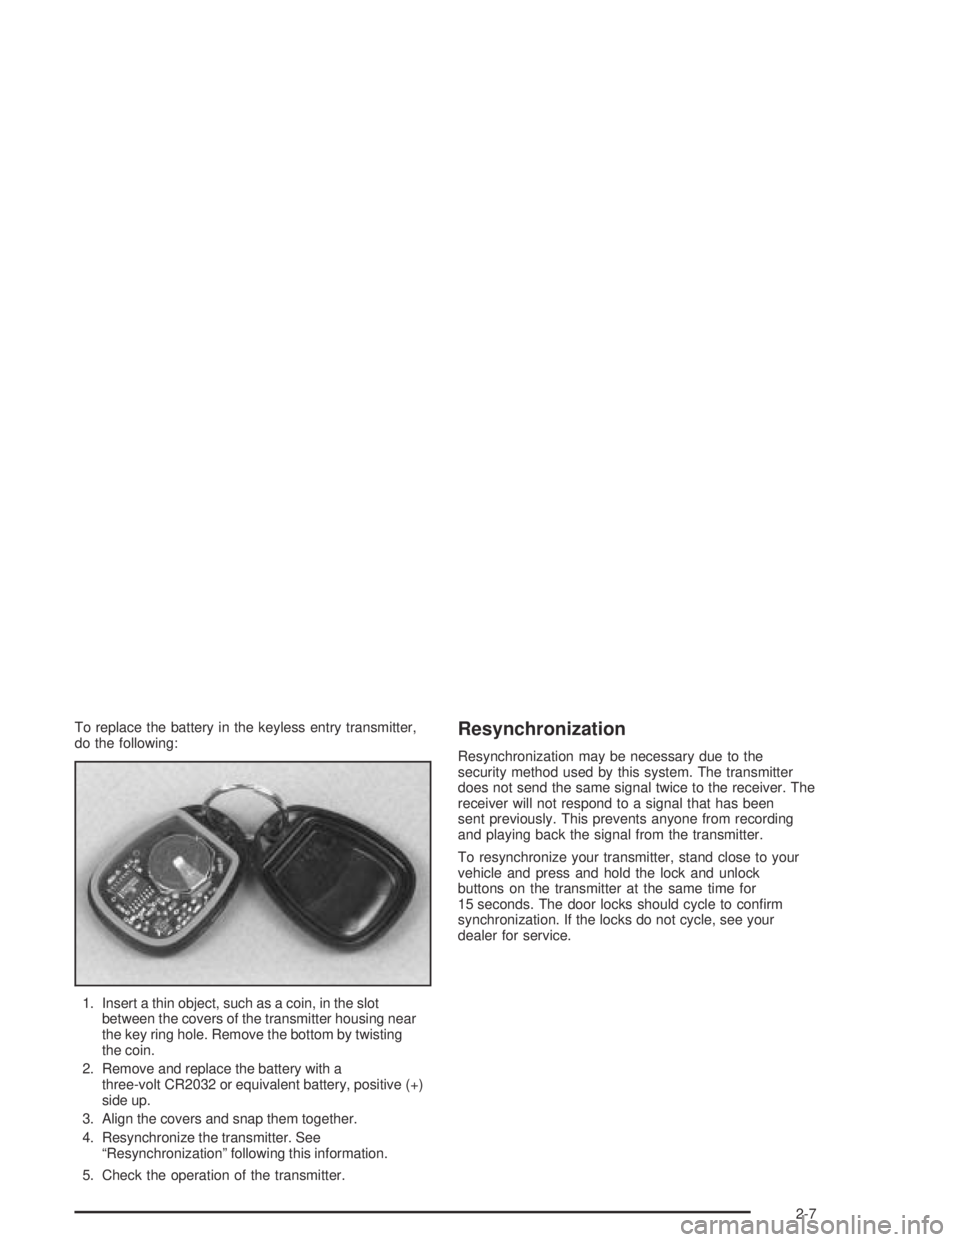 HUMMER H2 2005  Owners Manual To replace the battery in the keyless entry transmitter,
do the following:
1. Insert a thin object, such as a coin, in the slot
between the covers of the transmitter housing near
the key ring hole. Re